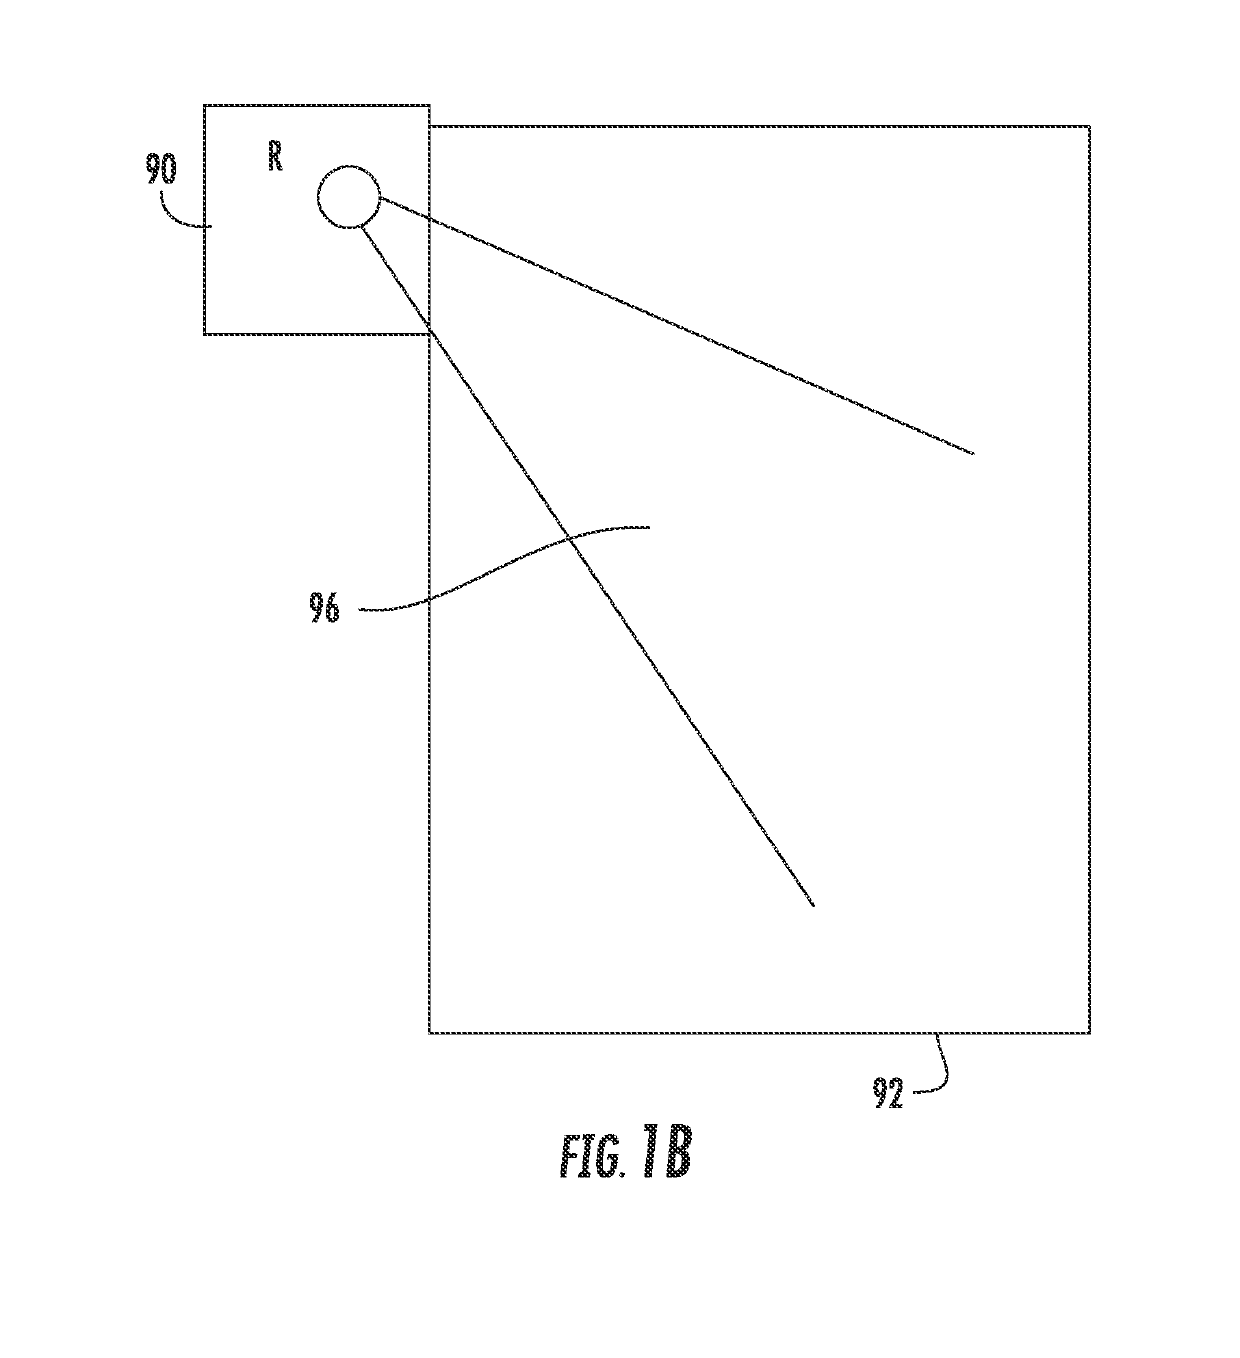 Determining an intimate activity by a detection device